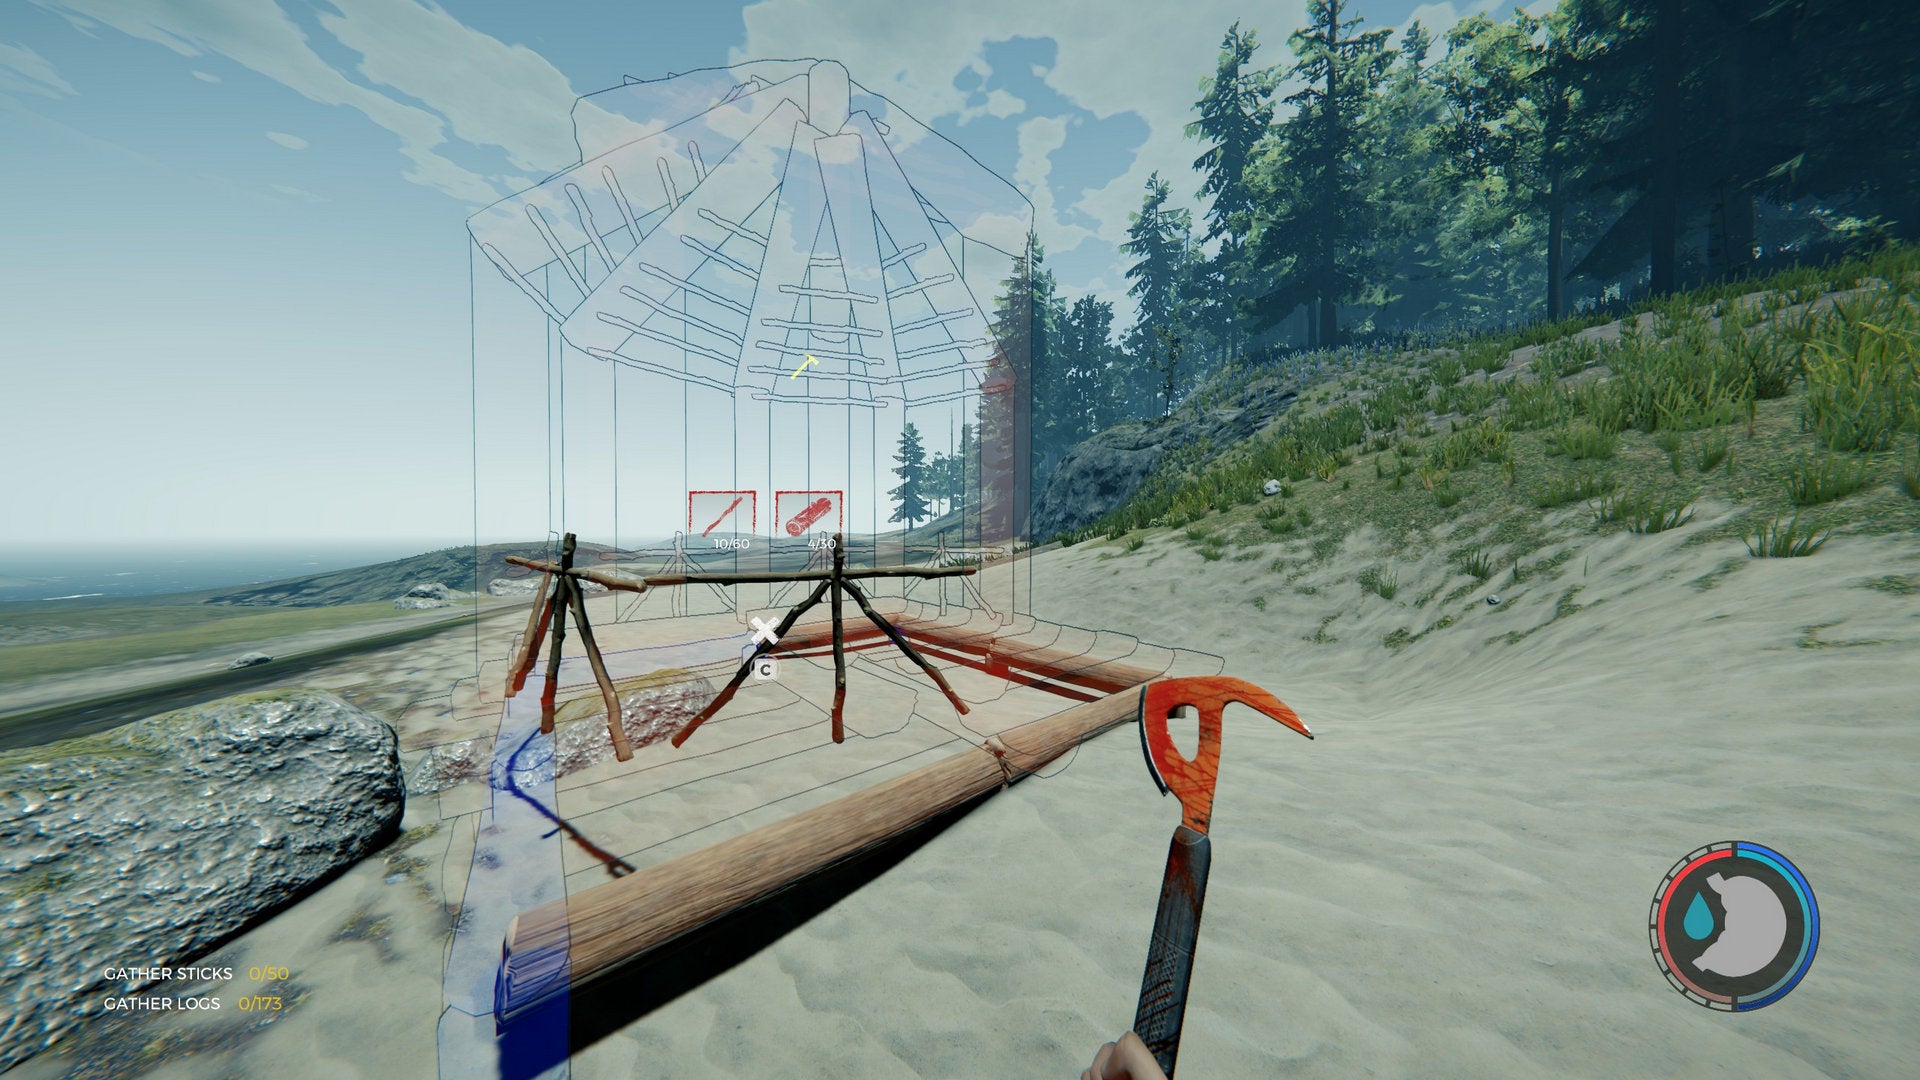 A player constructs a small hut on a beach in The Forest